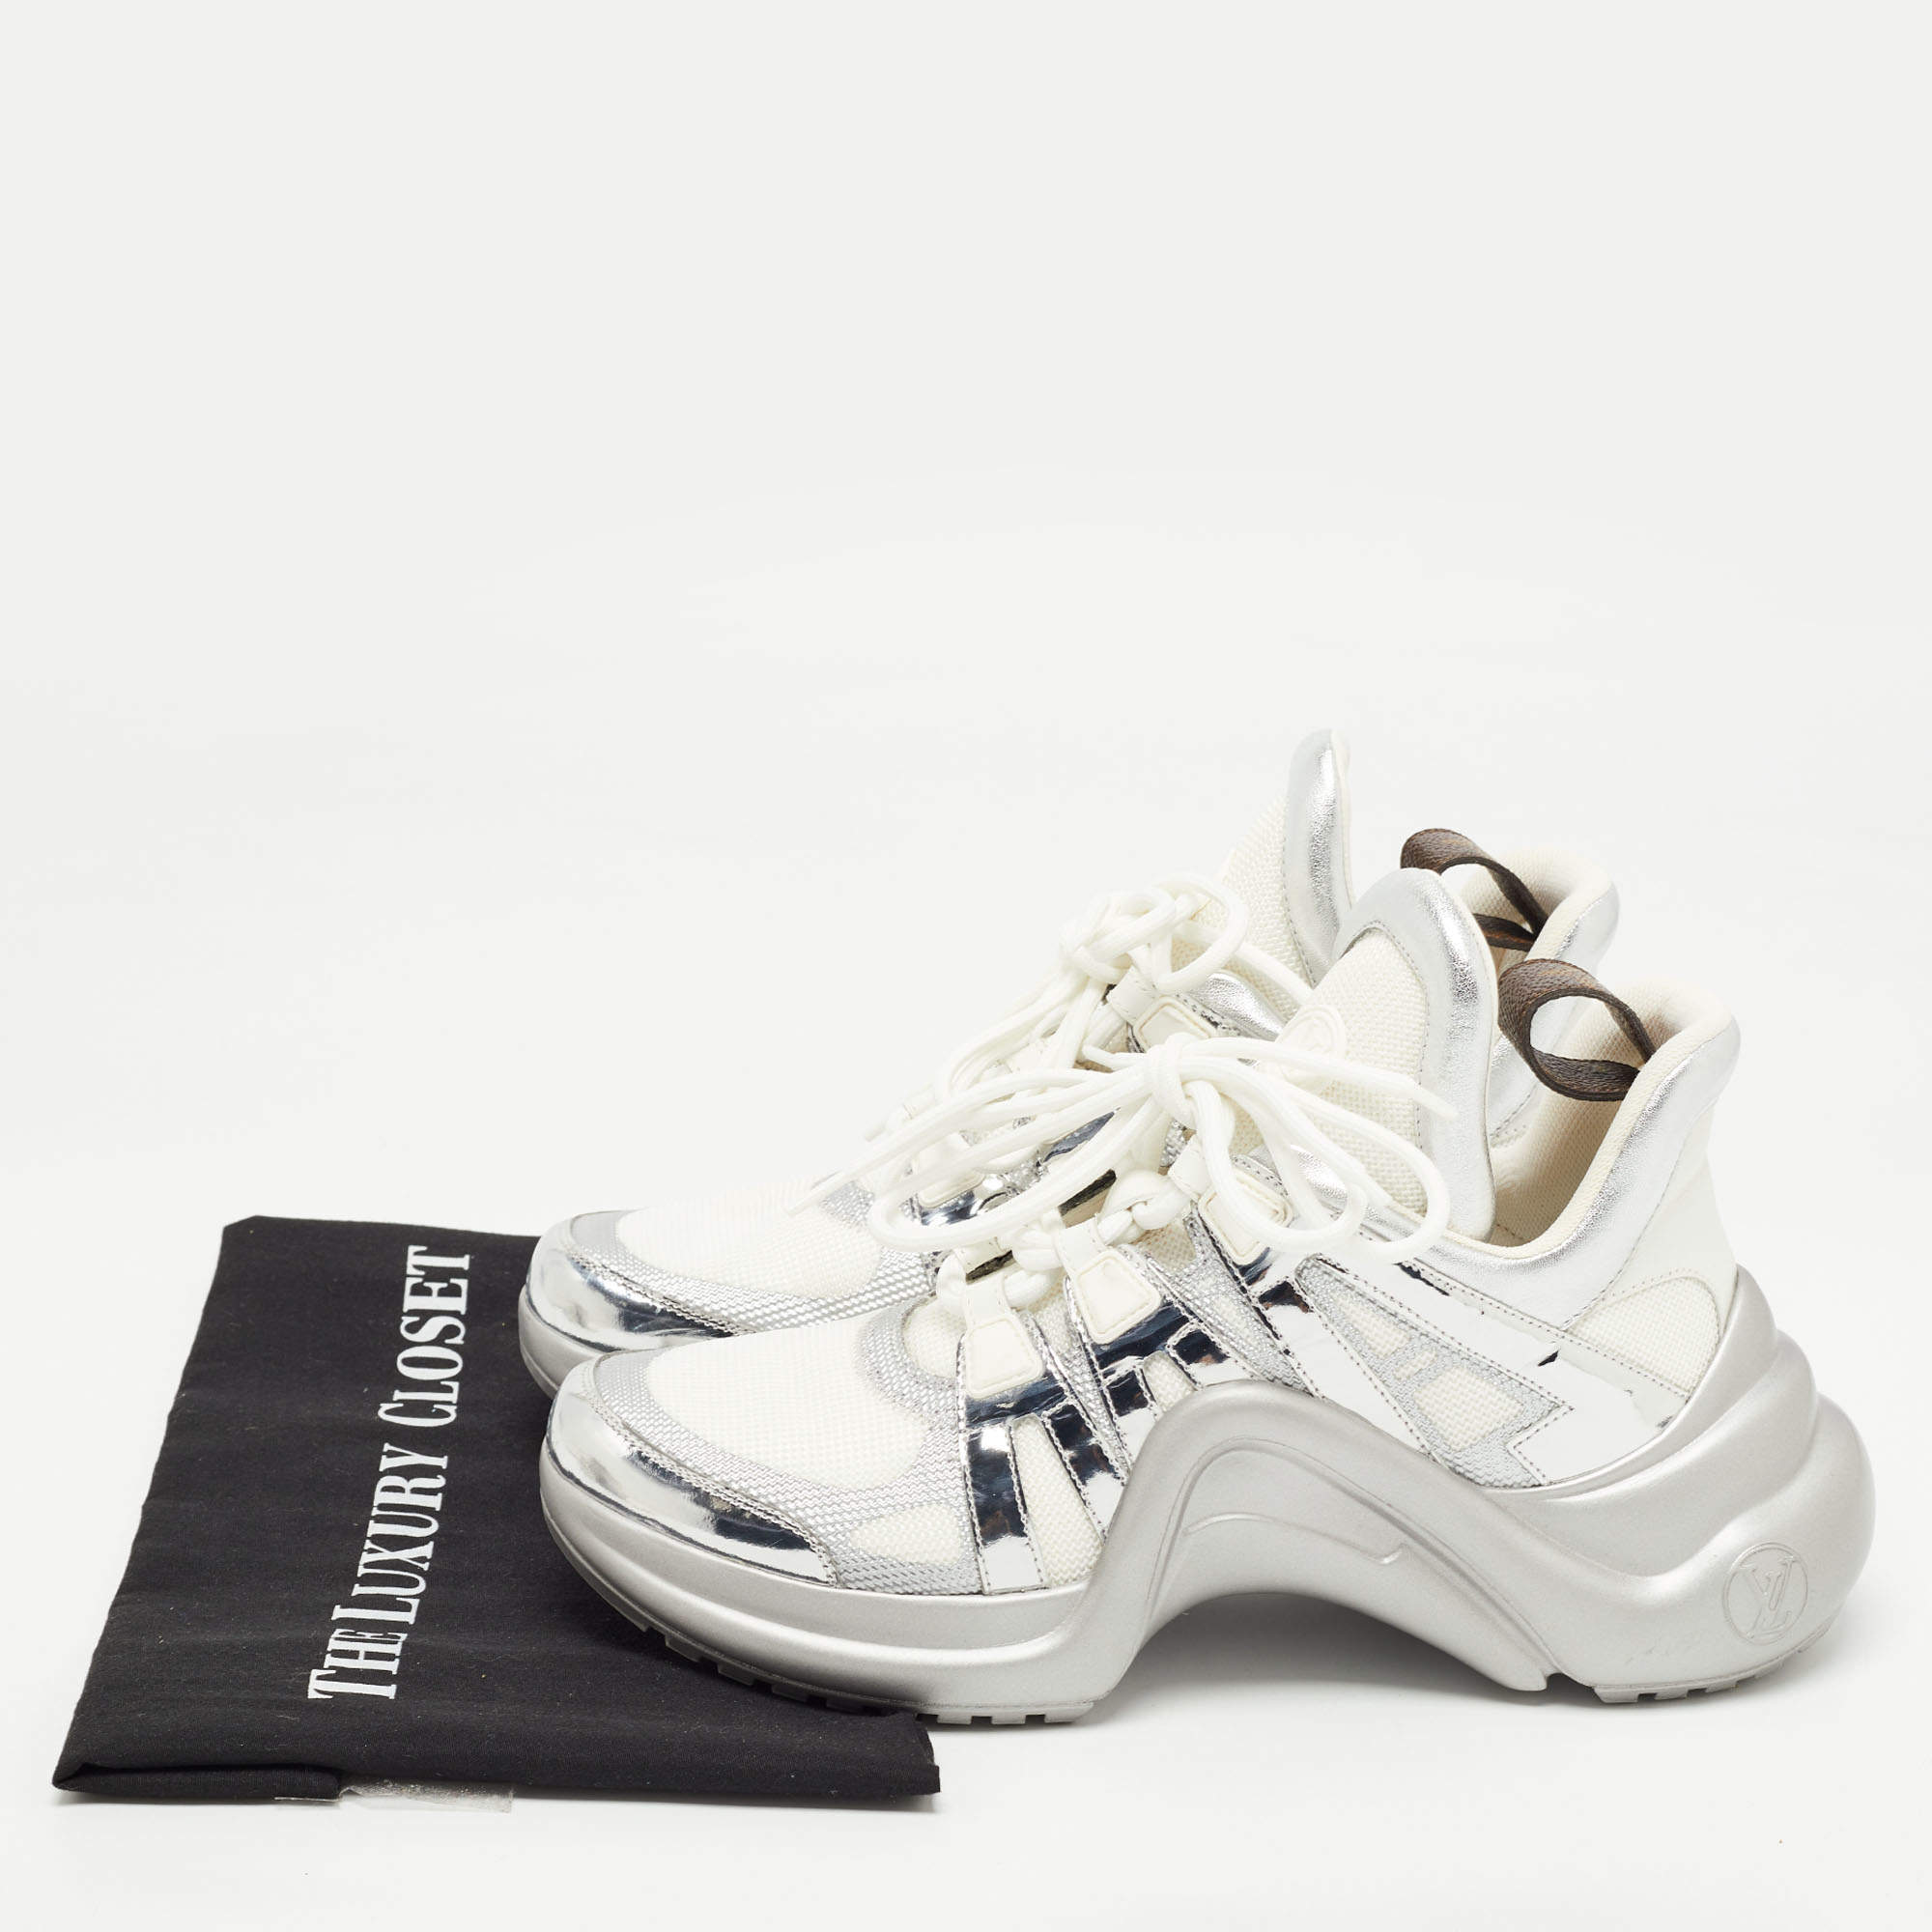 Shoes, Lv Archlight Sneakers Silver